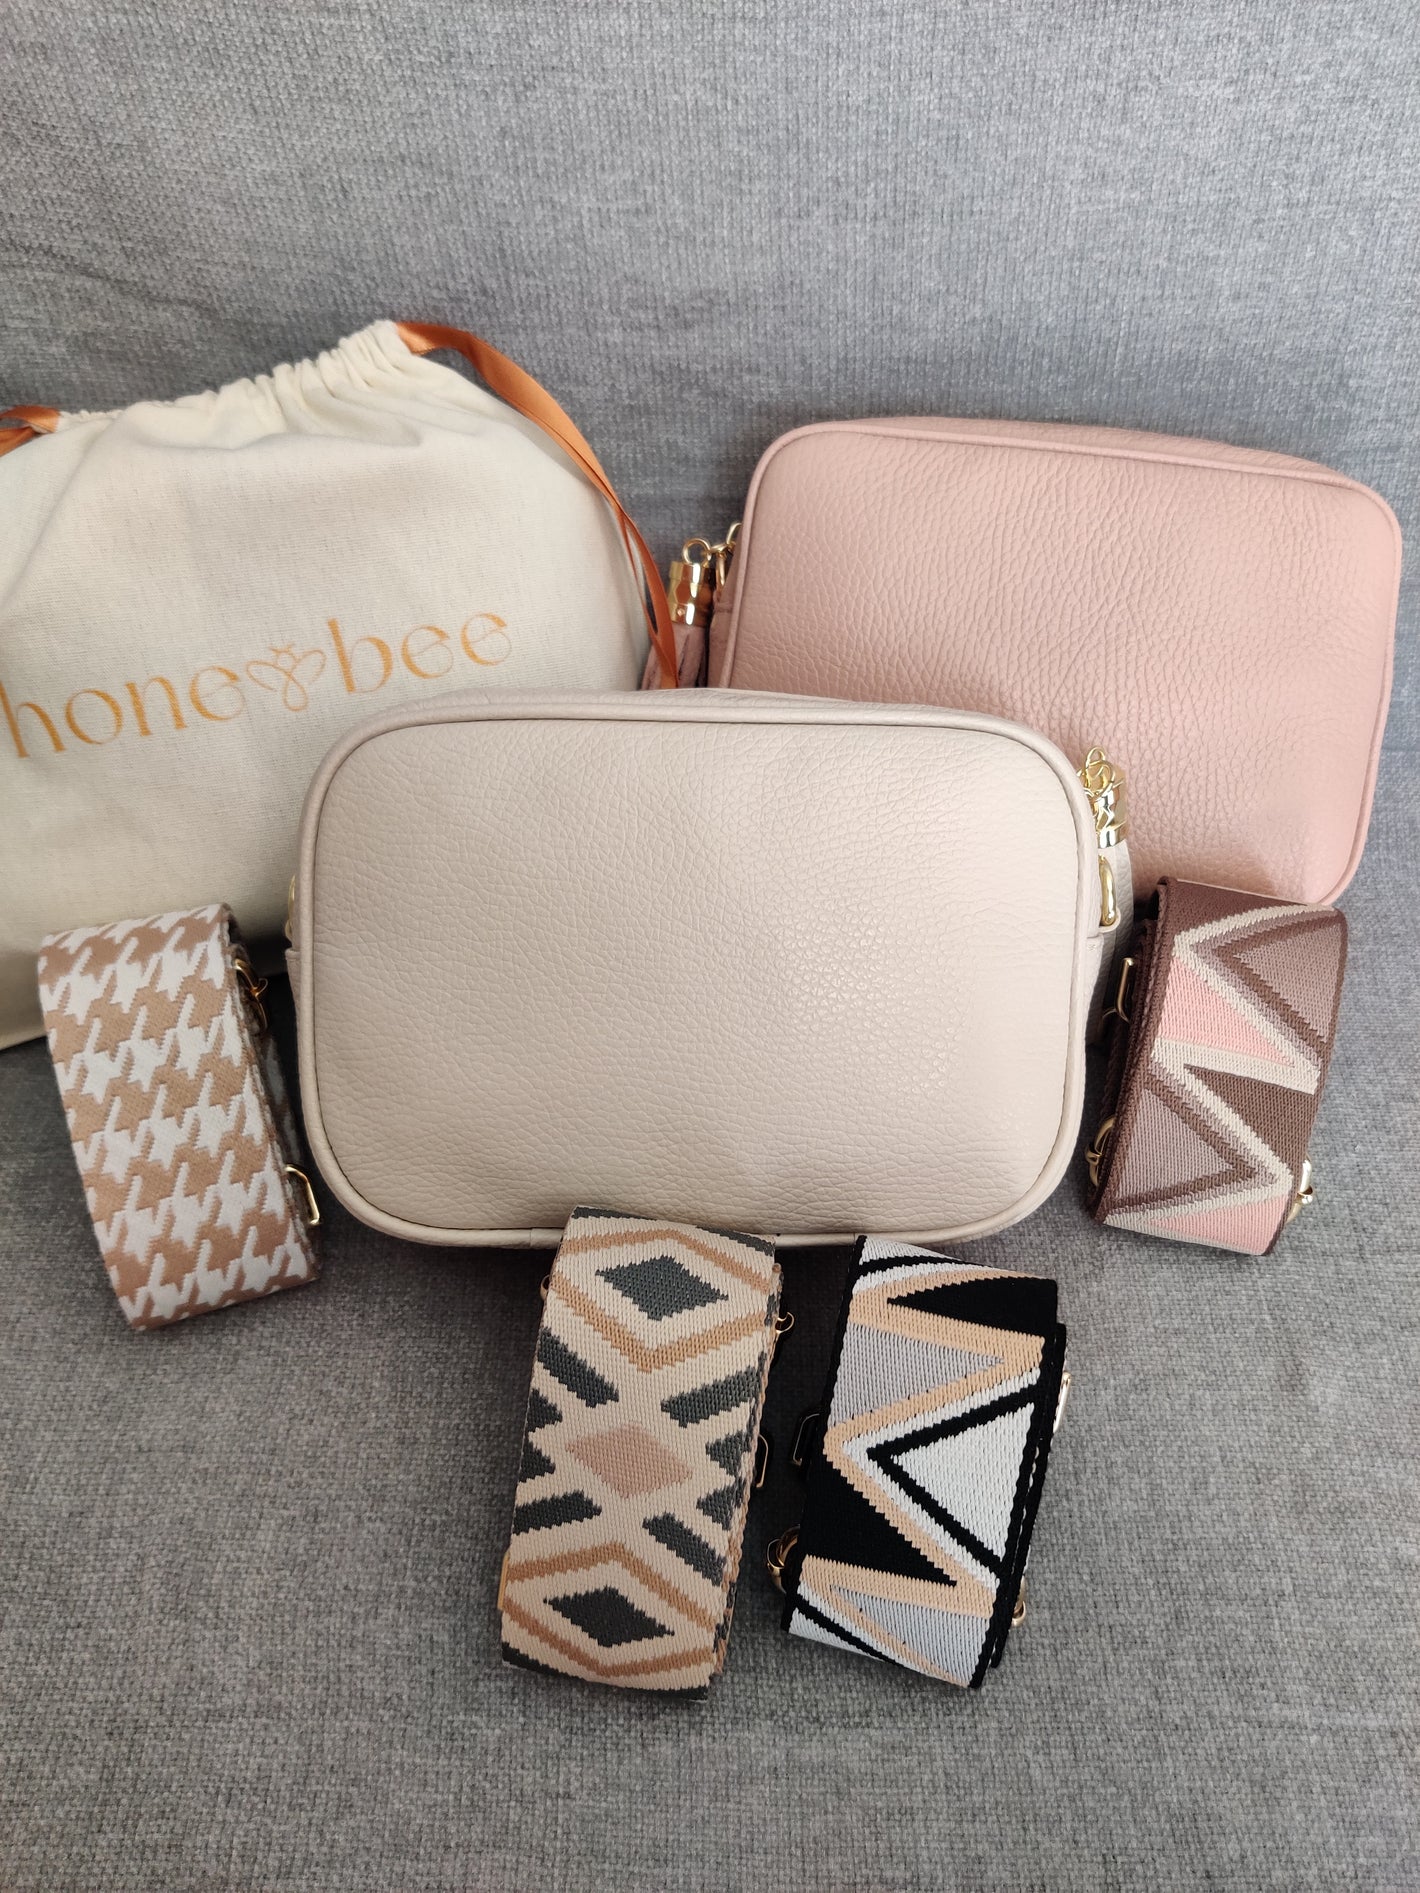 Shop our Brand new Honey Bee Nora Bags 